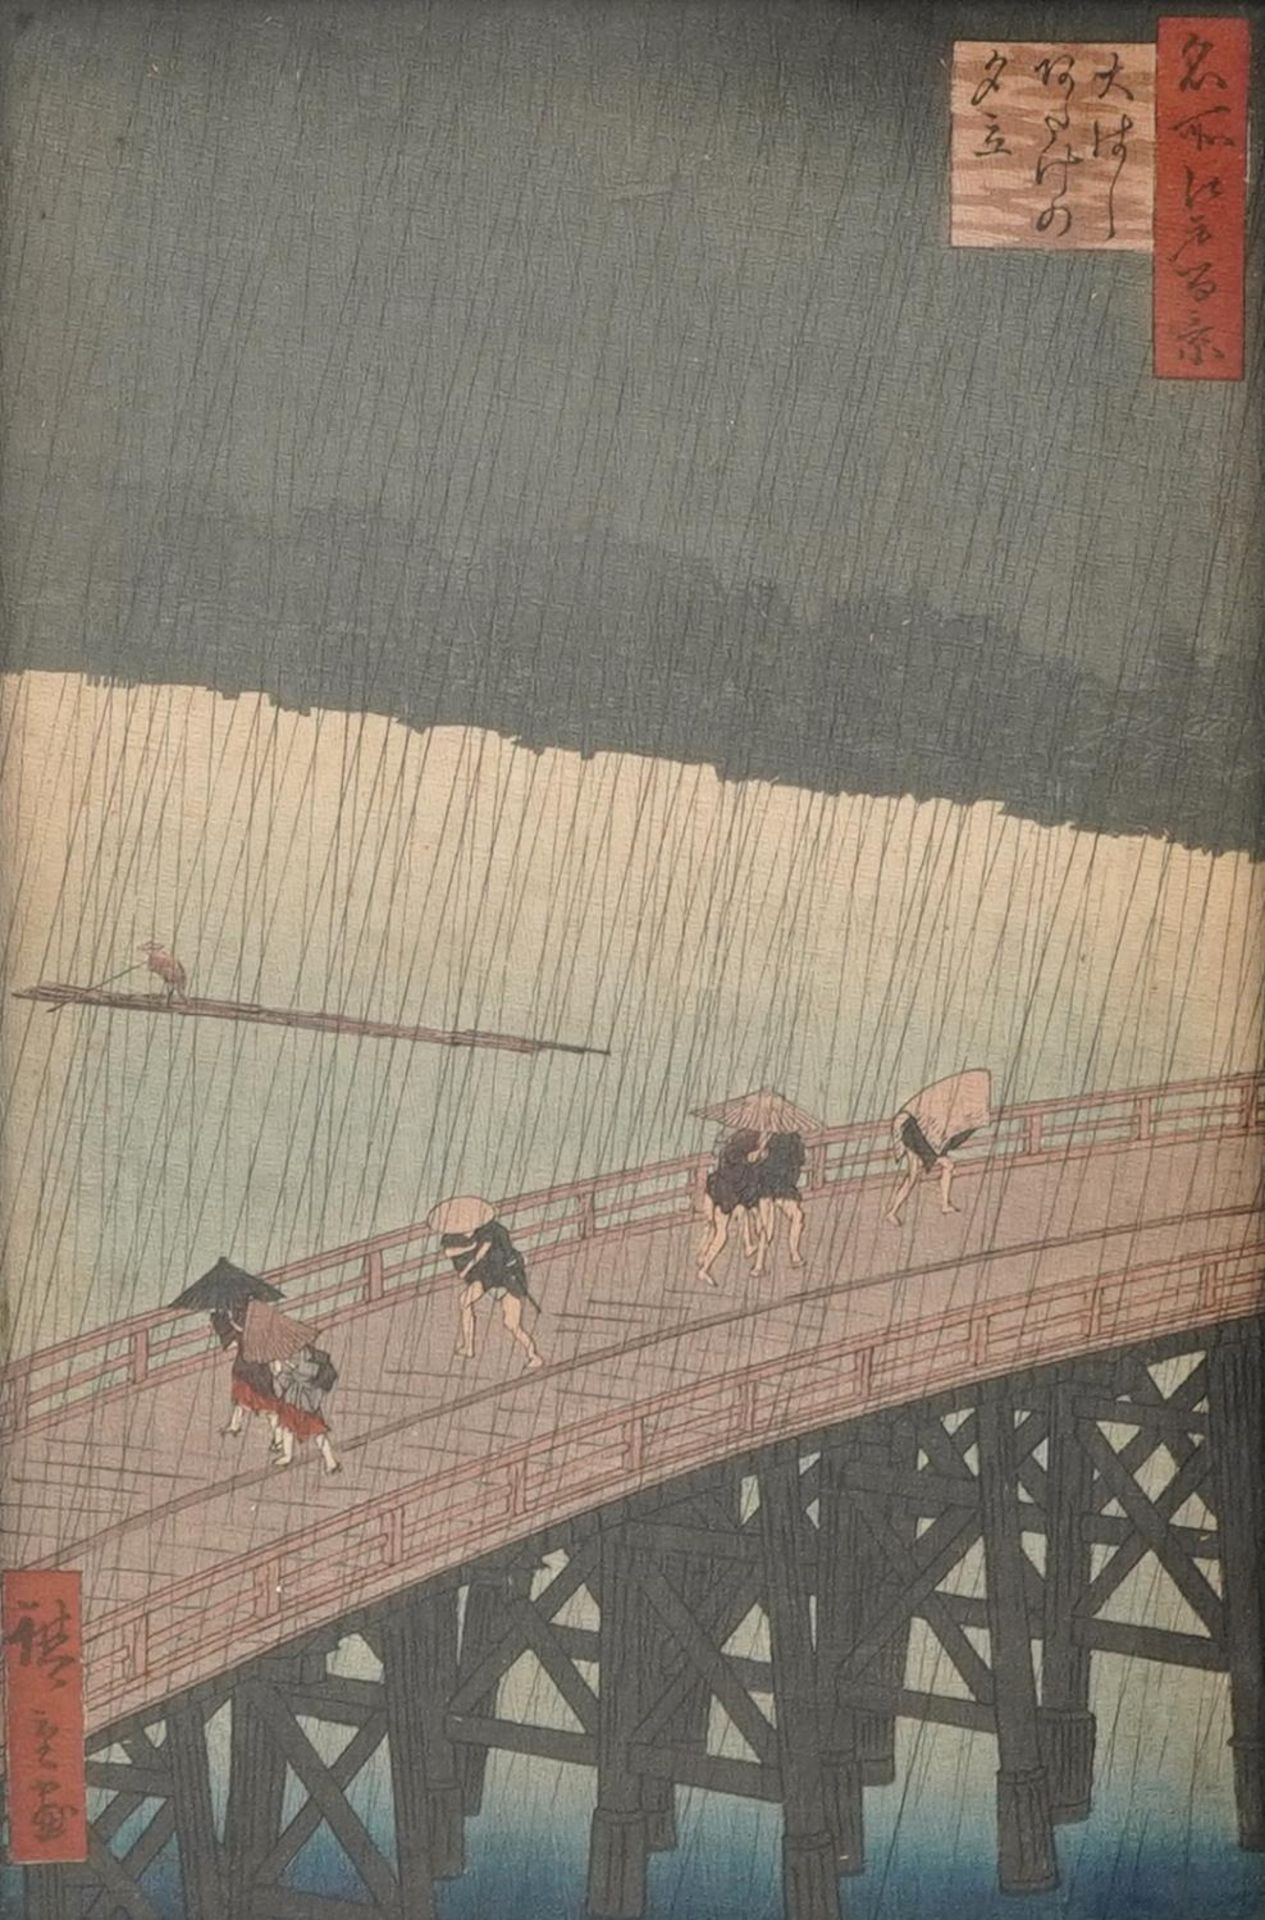 Figures crossing a bridge, Japanese woodblock print with various character marks, framed and glazed,